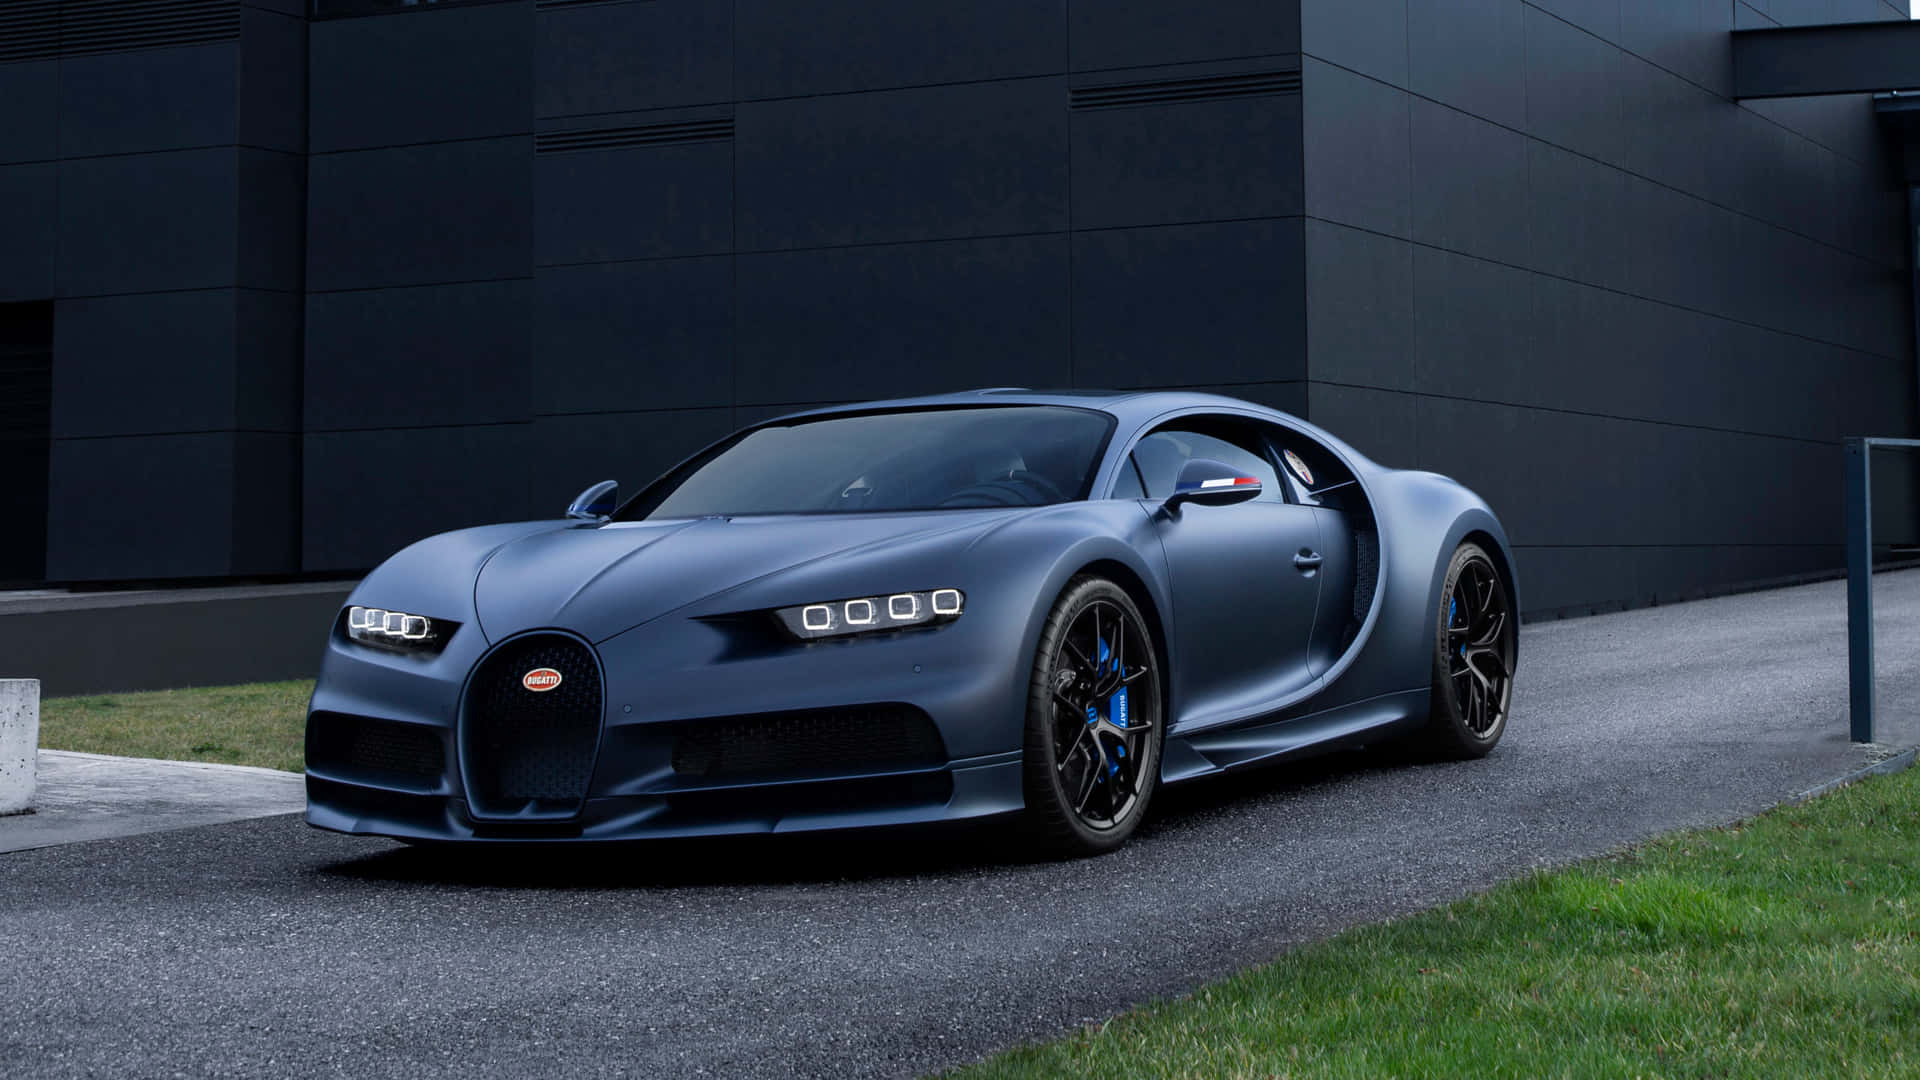 Cruise Through The Streets In Style With This Best Bugatti